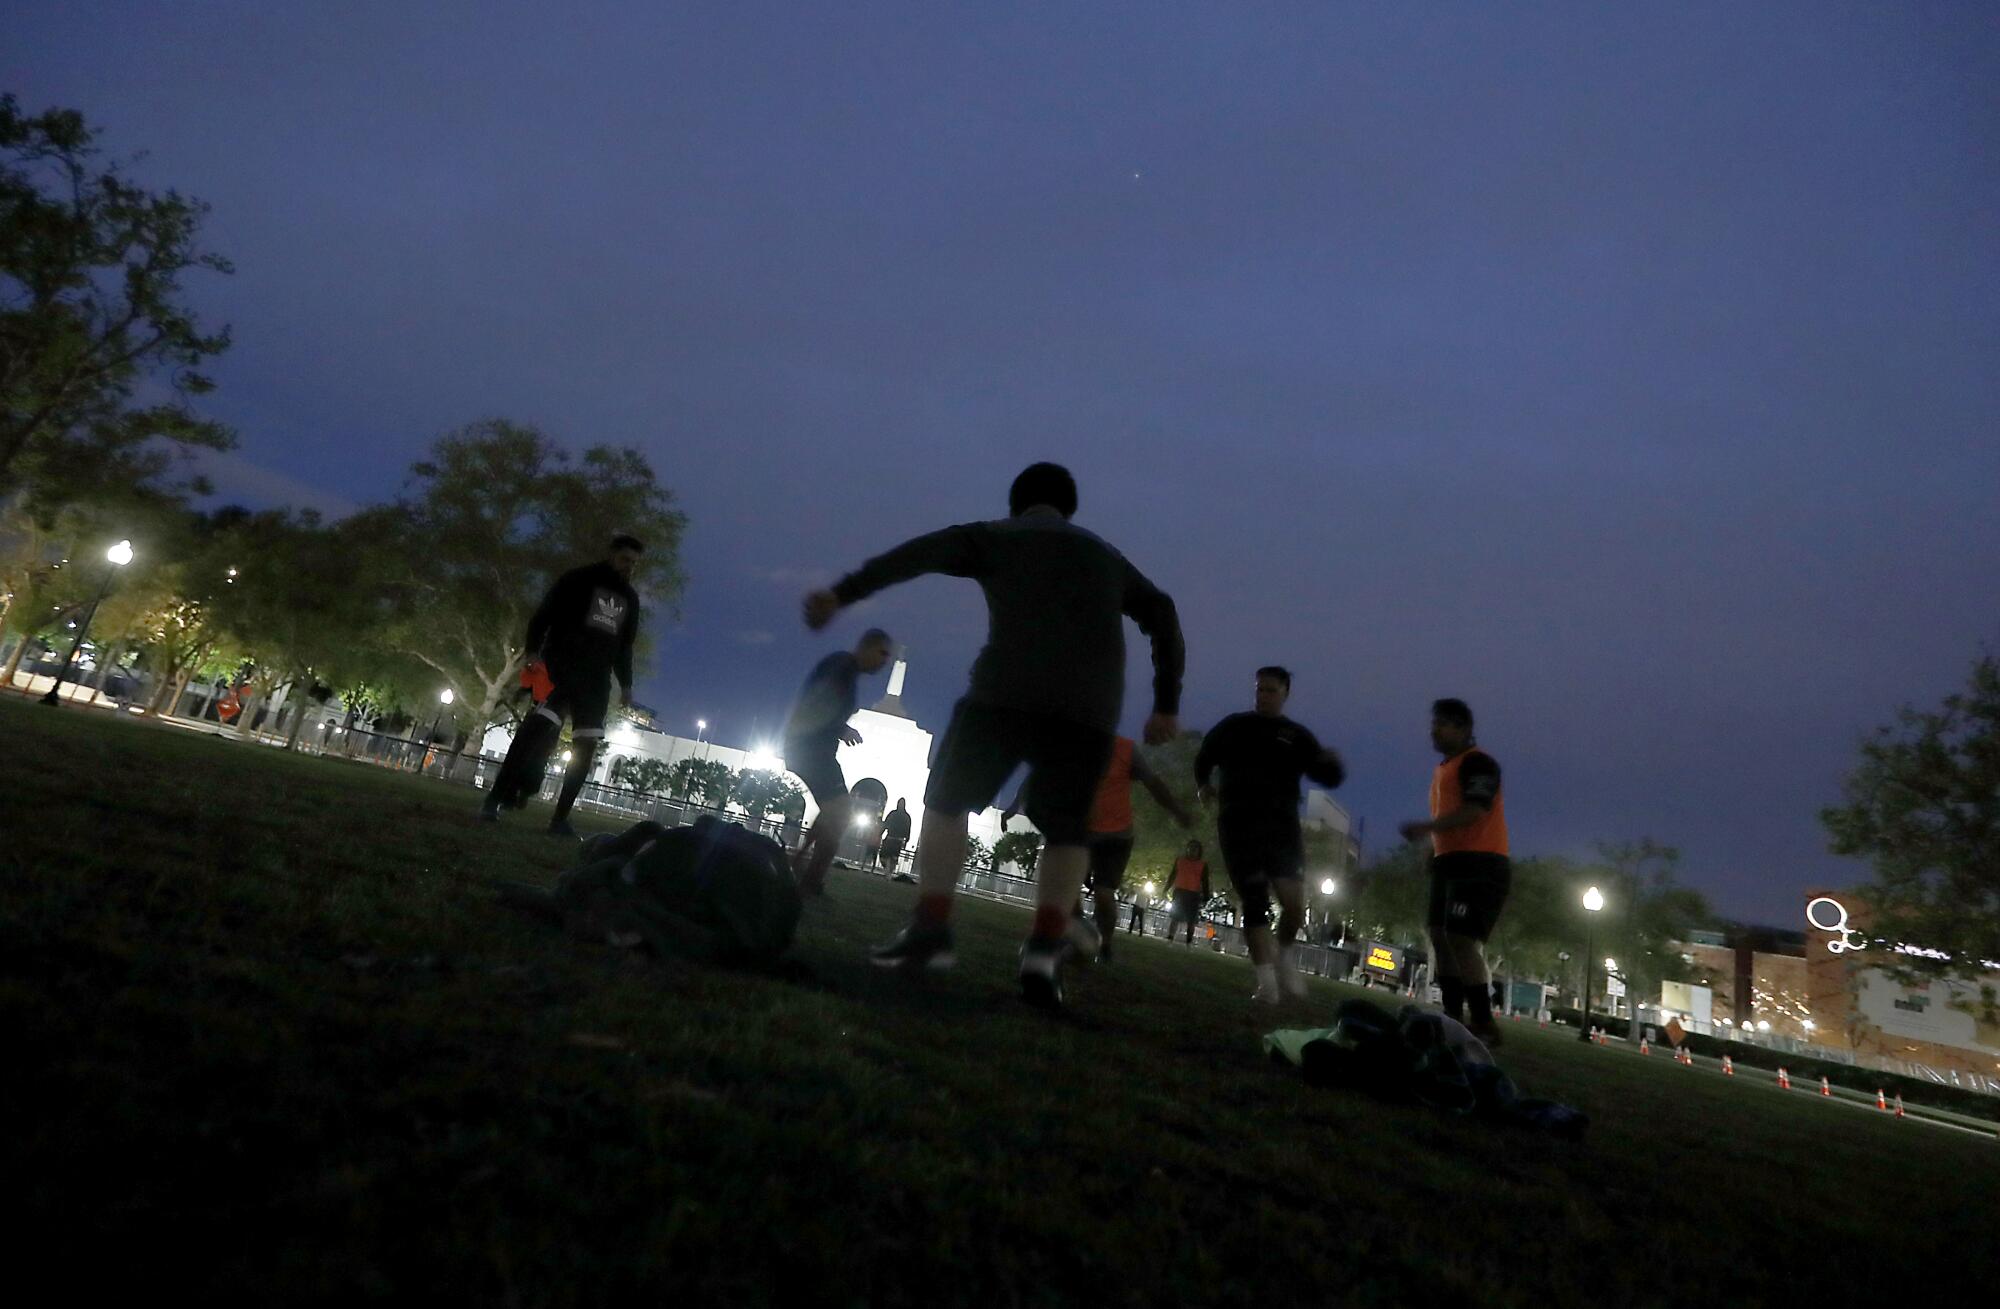 Men play soccer, violating social distancing restrictions, near the Los Angeles Memorial Coliseum in Exposition Park.